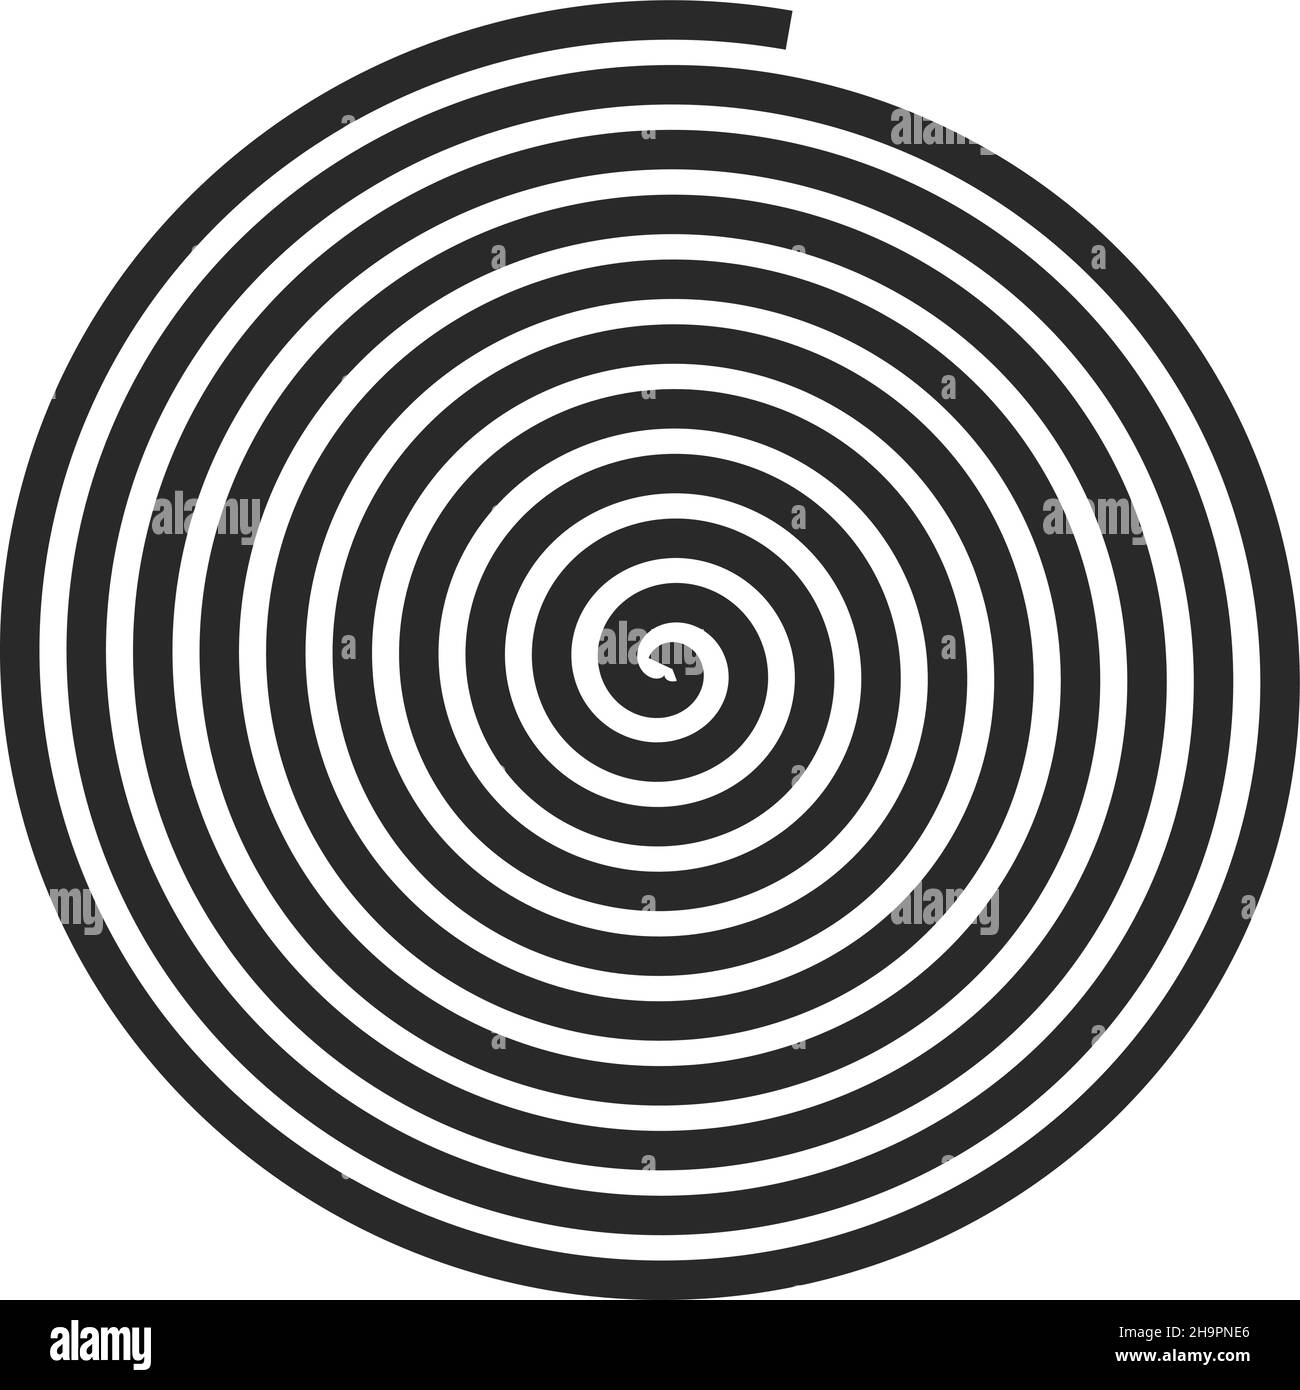 Spiral motion illusion. Black round helix shape Stock Vector Image